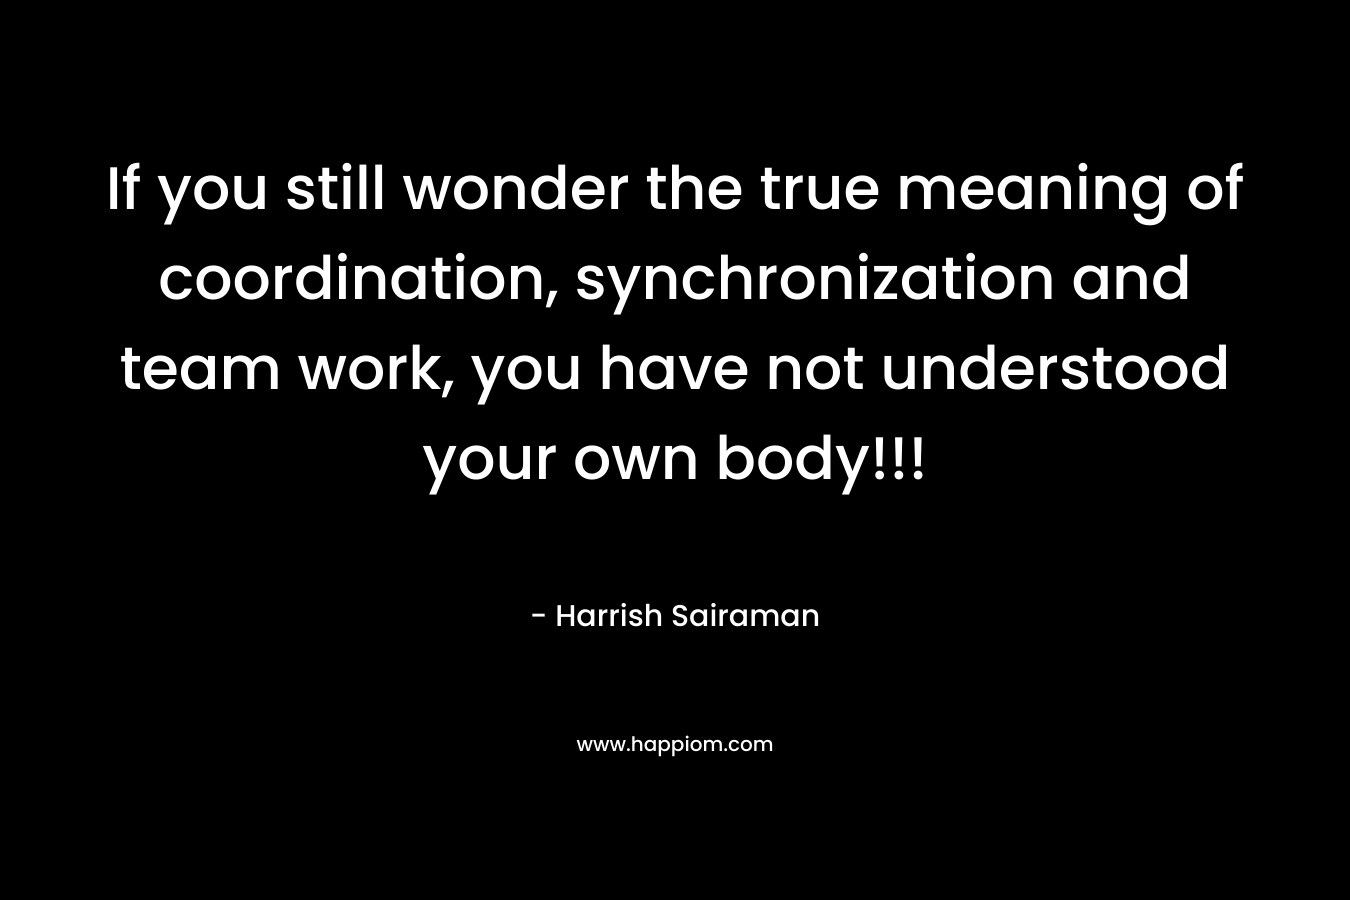 If you still wonder the true meaning of coordination, synchronization and team work, you have not understood your own body!!! – Harrish Sairaman